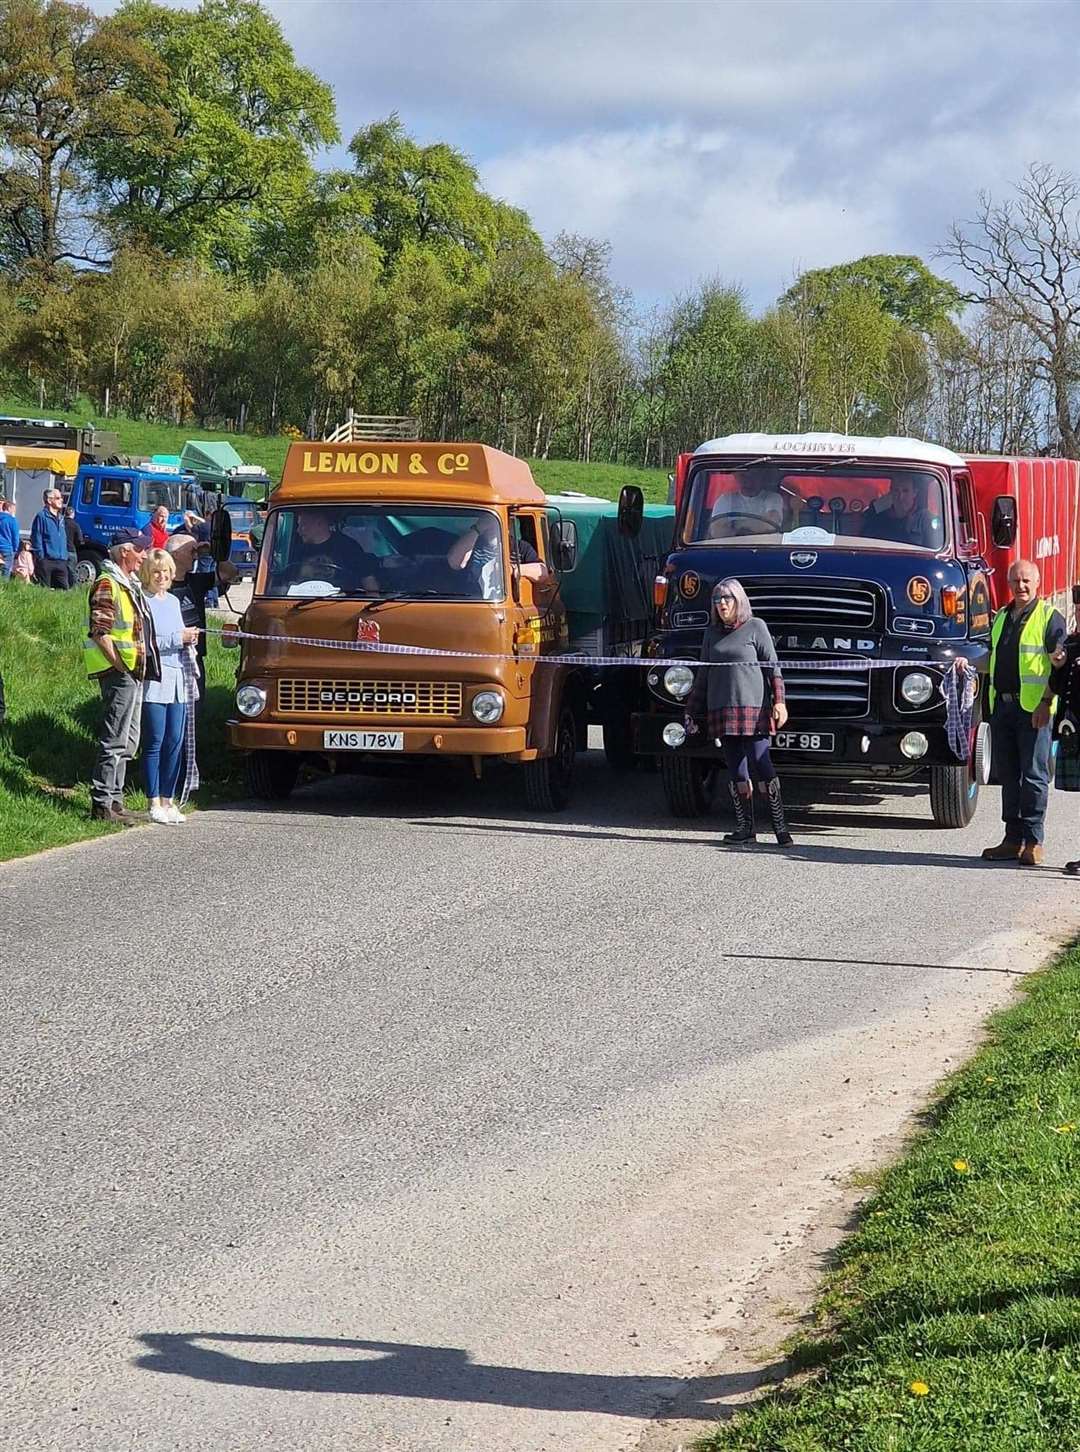 The Bedford Lemon and Co lorry was driven by Ewen Ross (Contin). The second Lochinver fish Leyland was driven by Jimmy Peat of Lochinver. Julie Board of Embo cut the ribbon. Colin Innes was the piper.